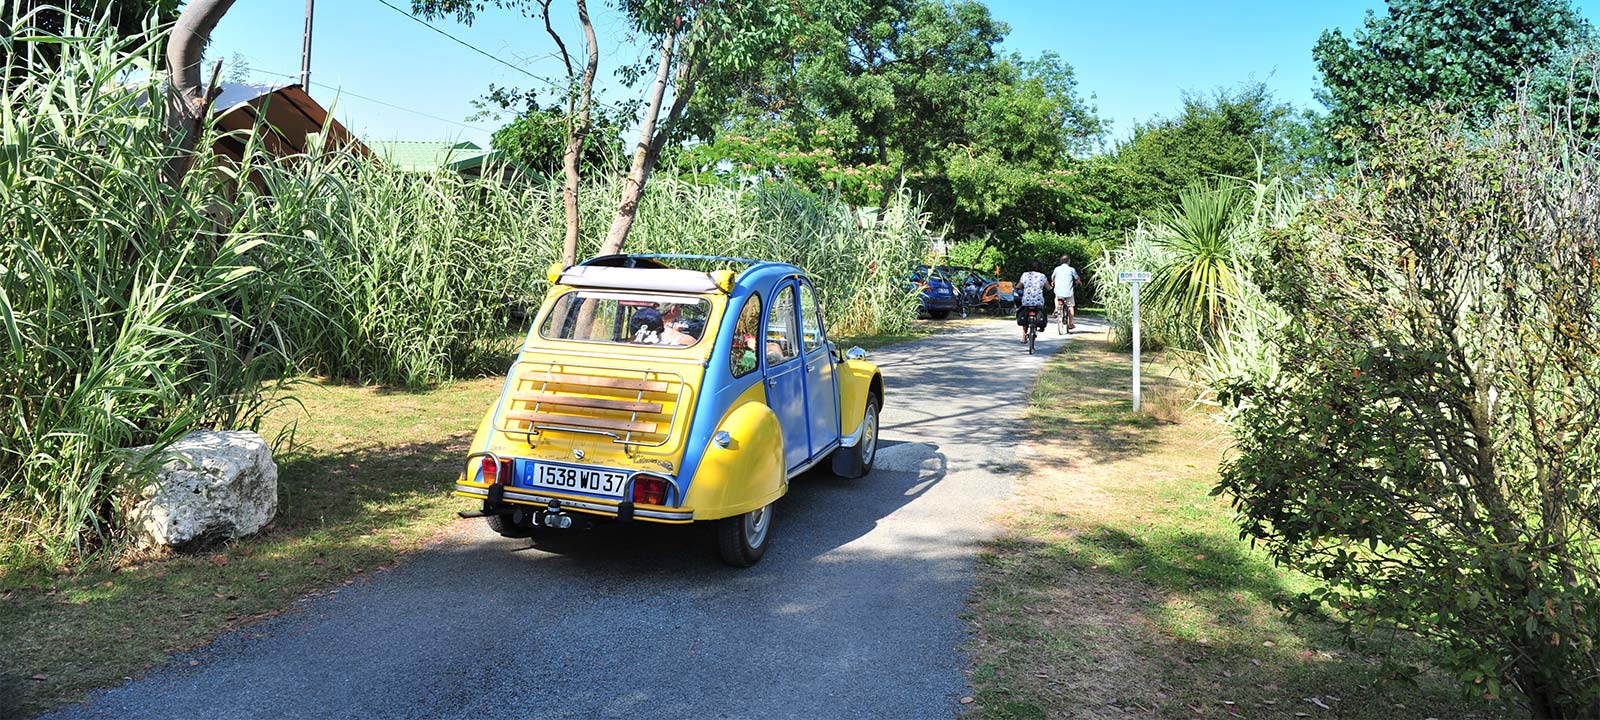 Yellow and blue Citroën 2CV in the driveway of the campsite in Oléron